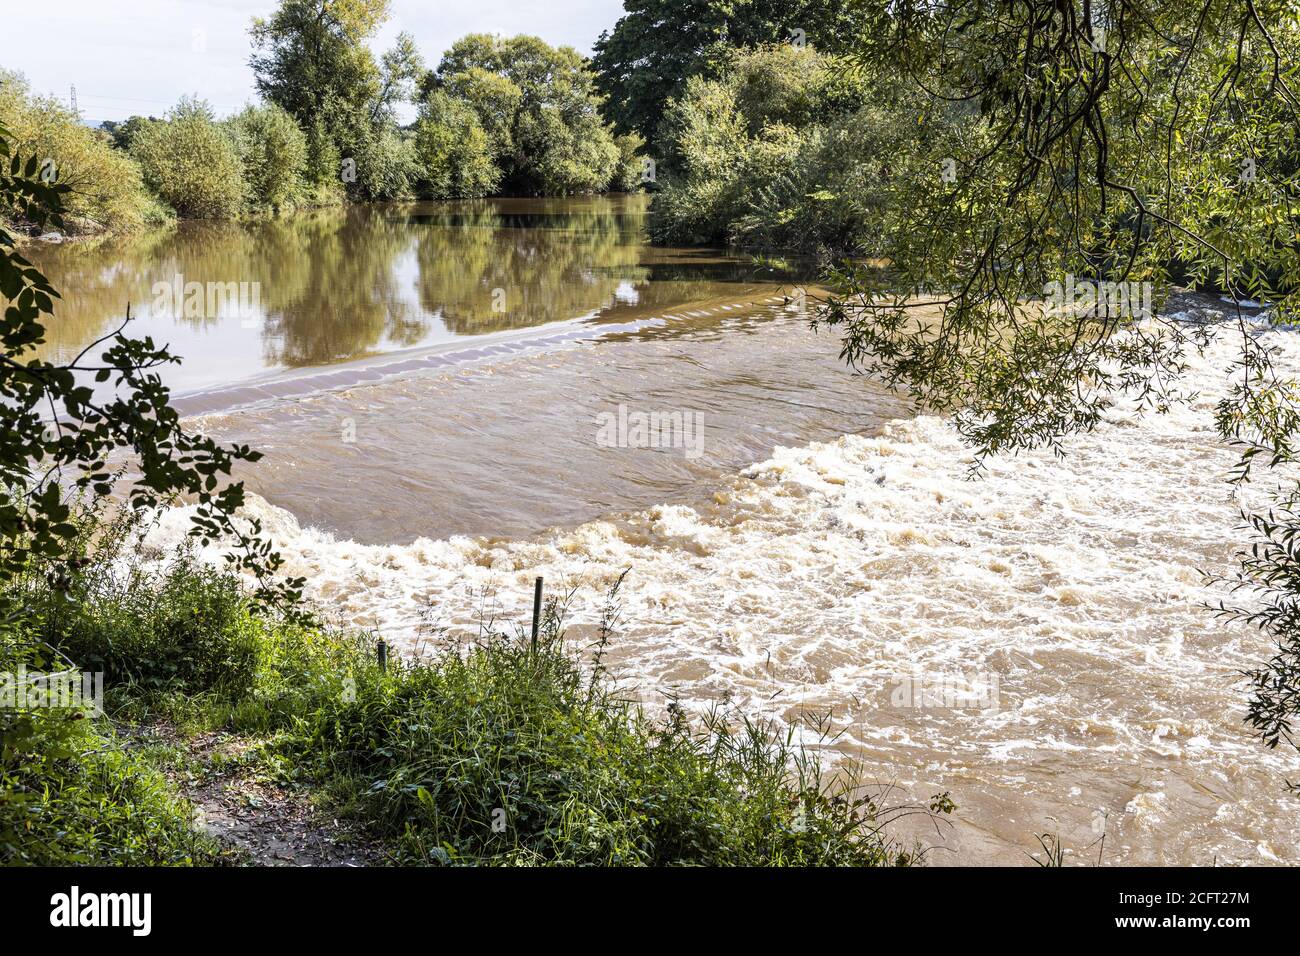 The weir on the River Severn at Upper Parting near the Severn Vale village of Maisemore, Gloucestershire UK Stock Photo